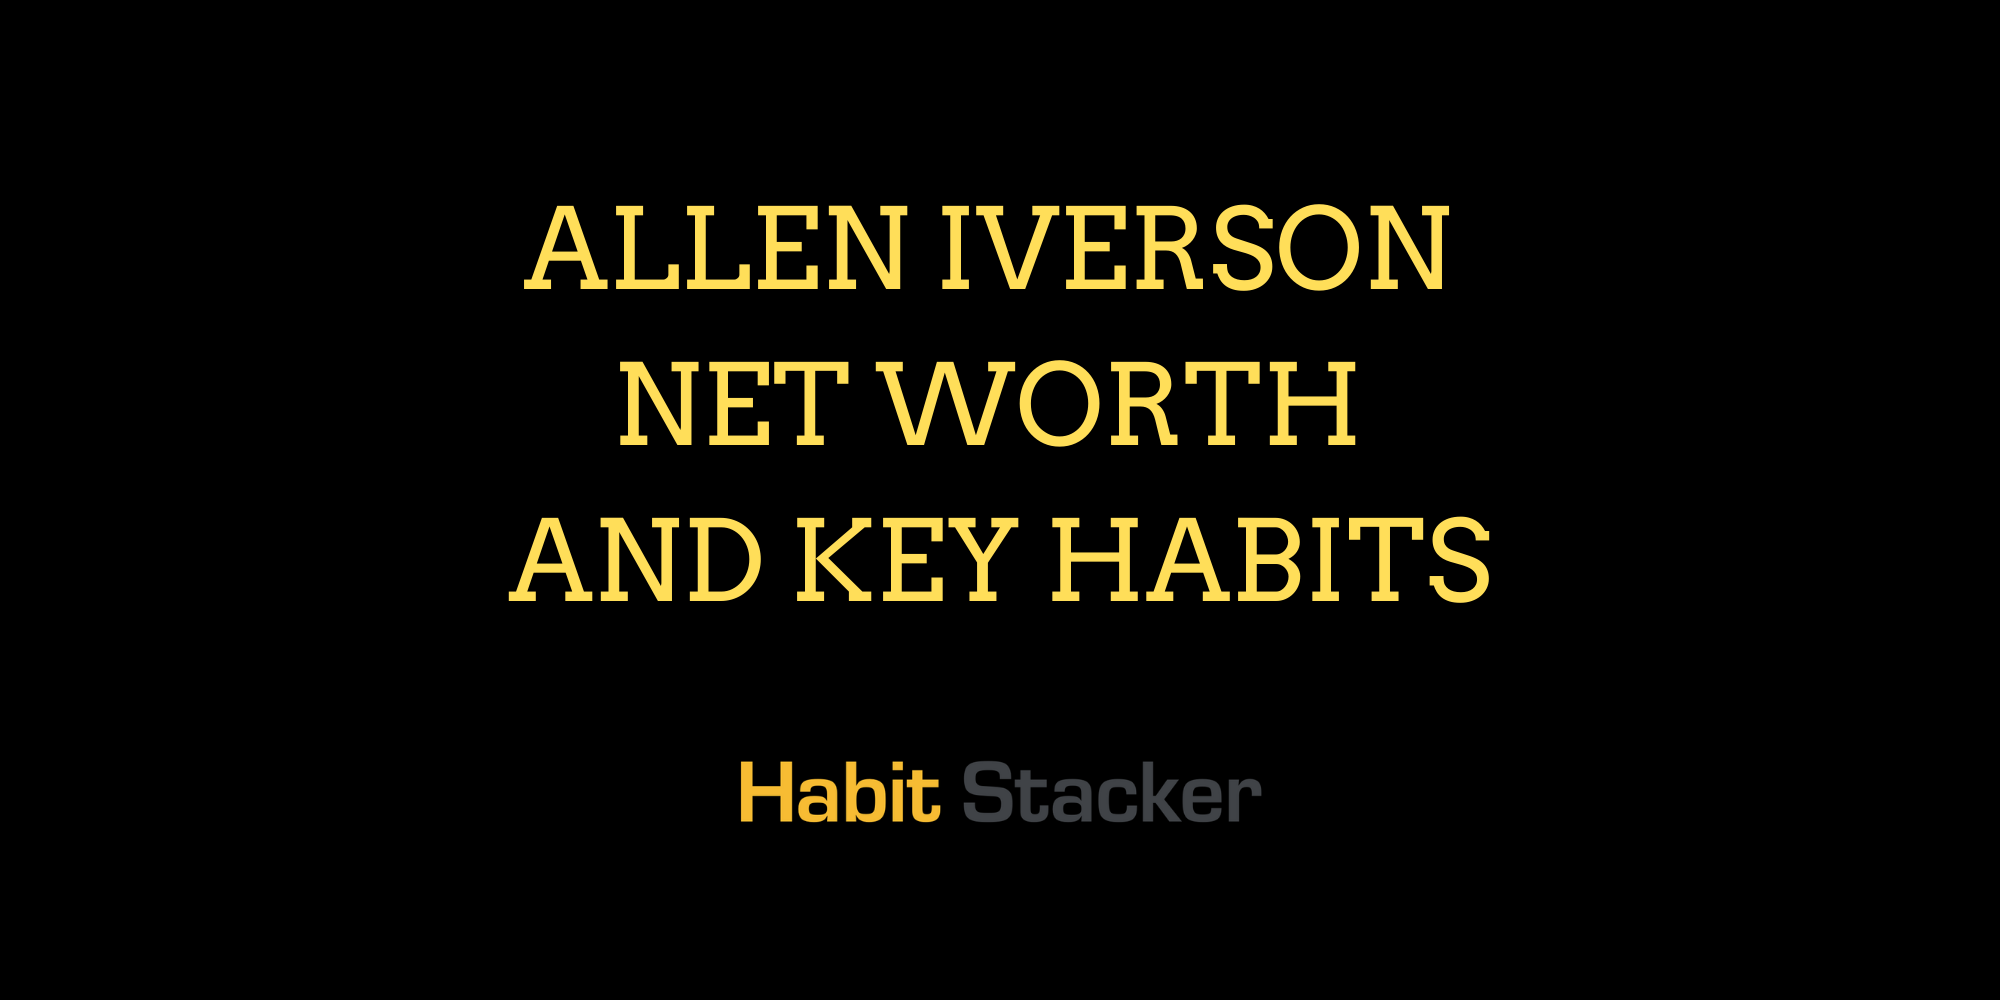 Allen Iverson Net Worth and Key Habits